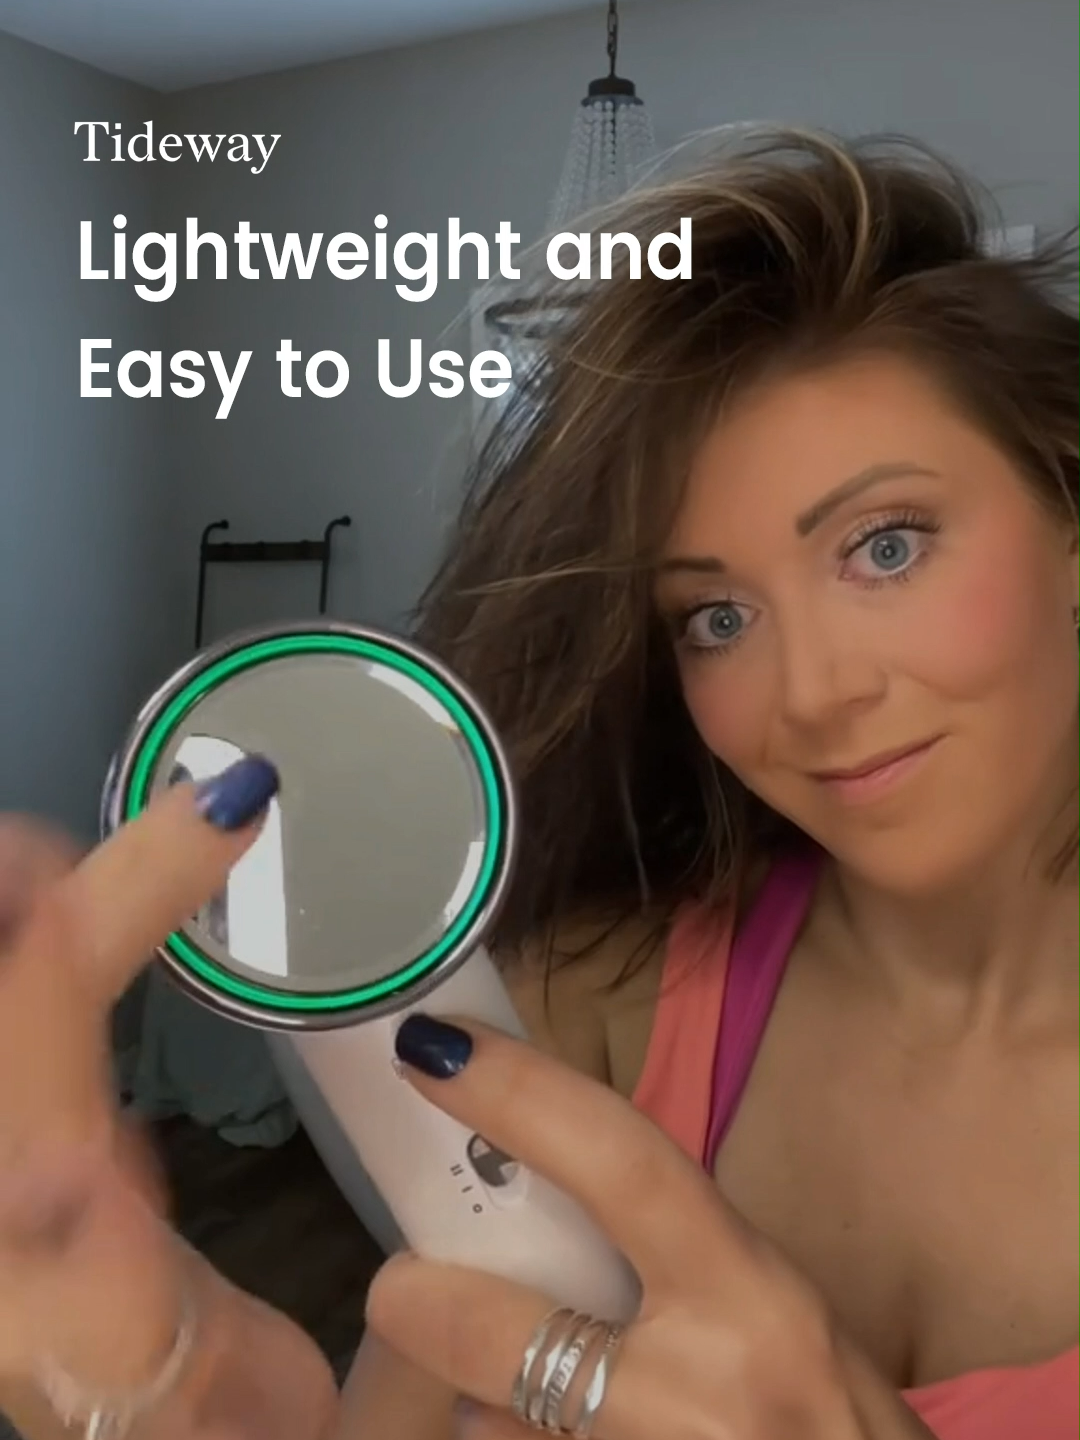 Achieve Perfect, Smooth Hair In Just Minutes With Tideway’s Advanced Dryer